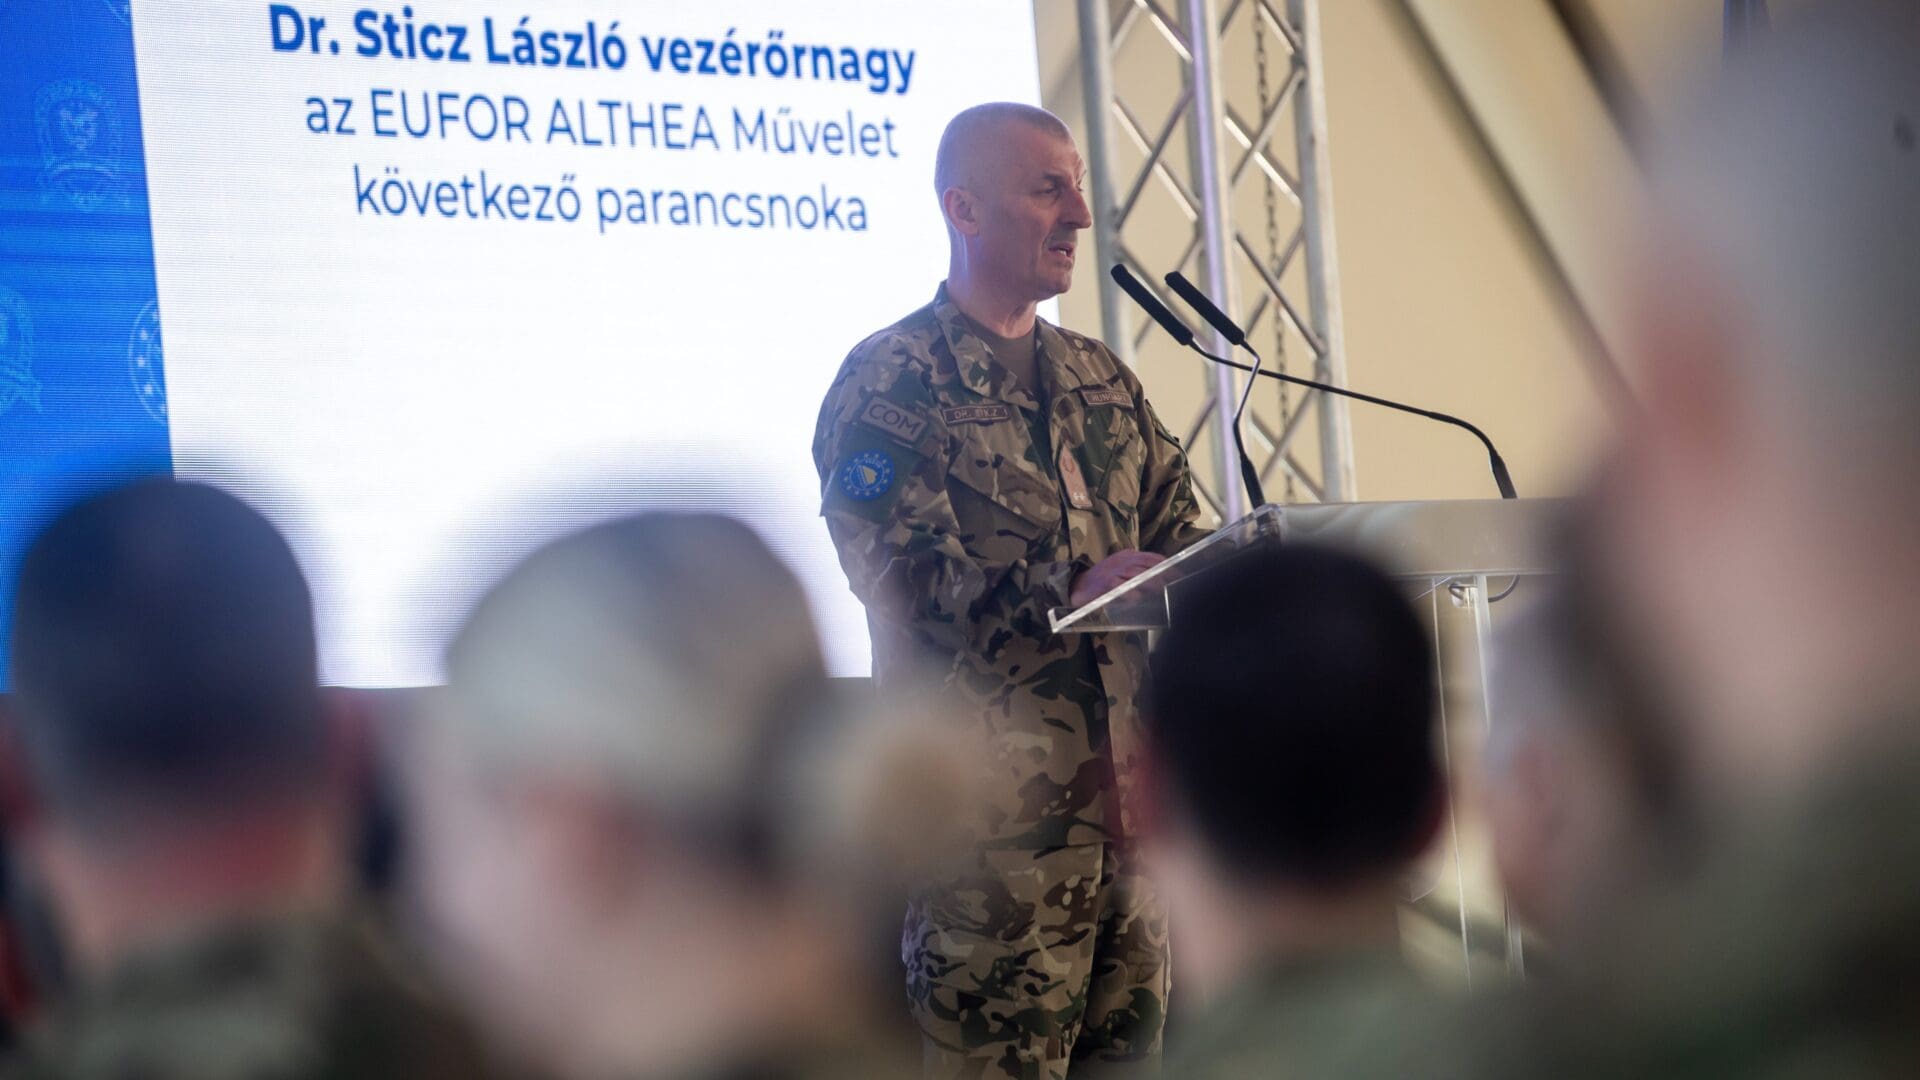 Major General László Sticz speaking at the release ceremony for the Hungarian troops that will be serving in the EUFOR ALTHEA mission in Bosnia and Herzegovina on 18 December 2023.